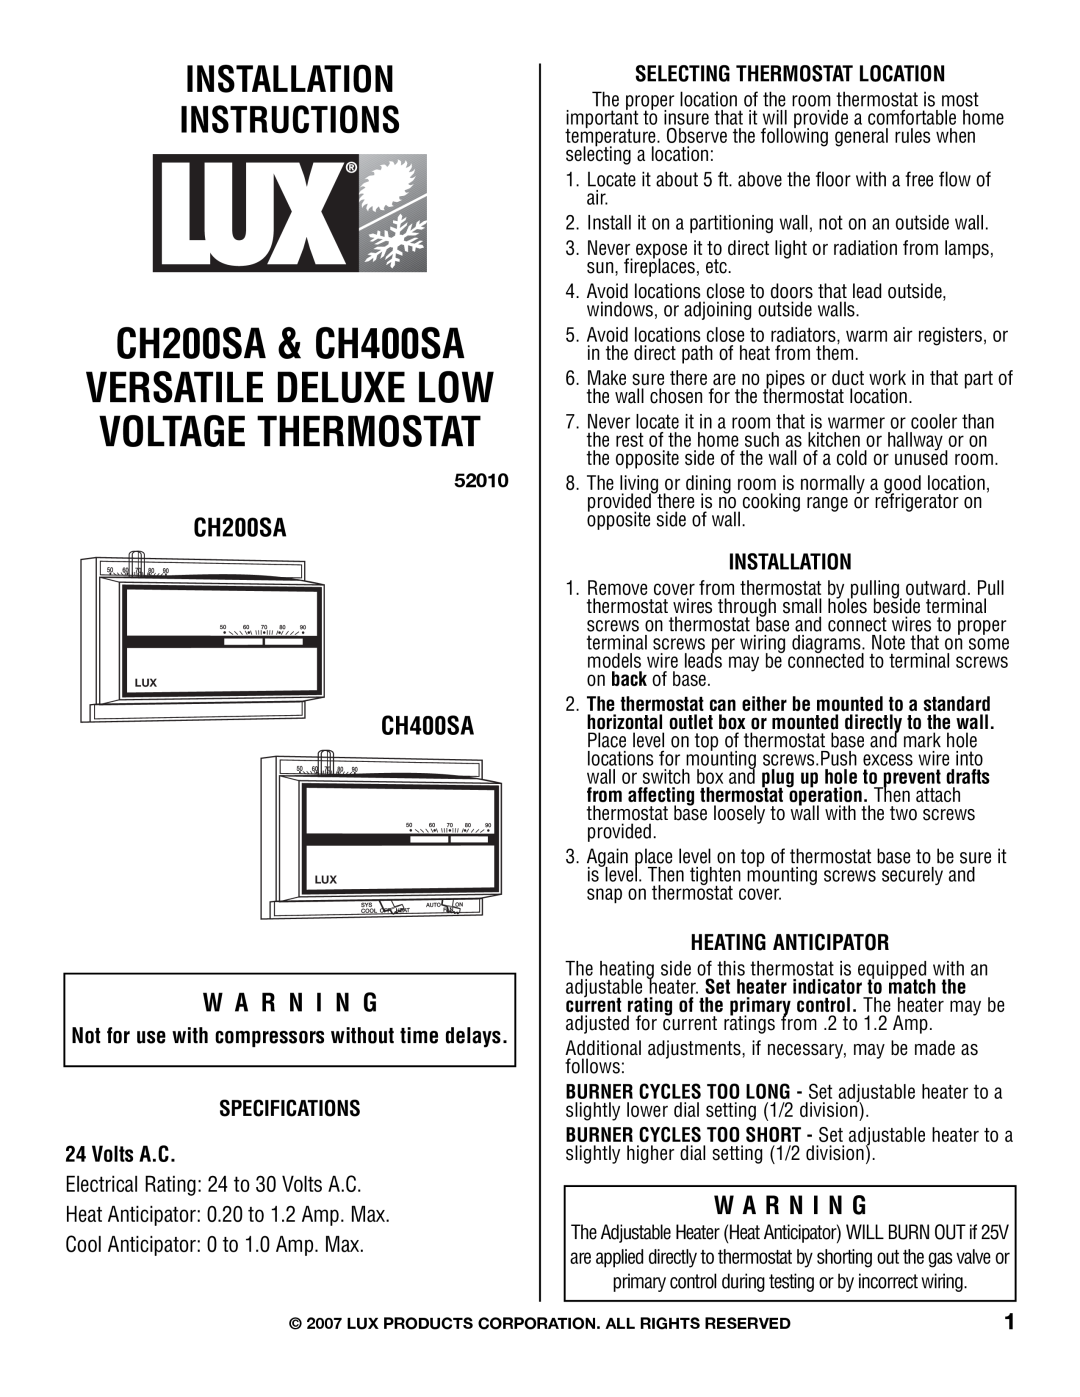 Lux Products CH200SA specifications CH400SA, W A R N I N G, 52010, Not for use with compressors without time delays 